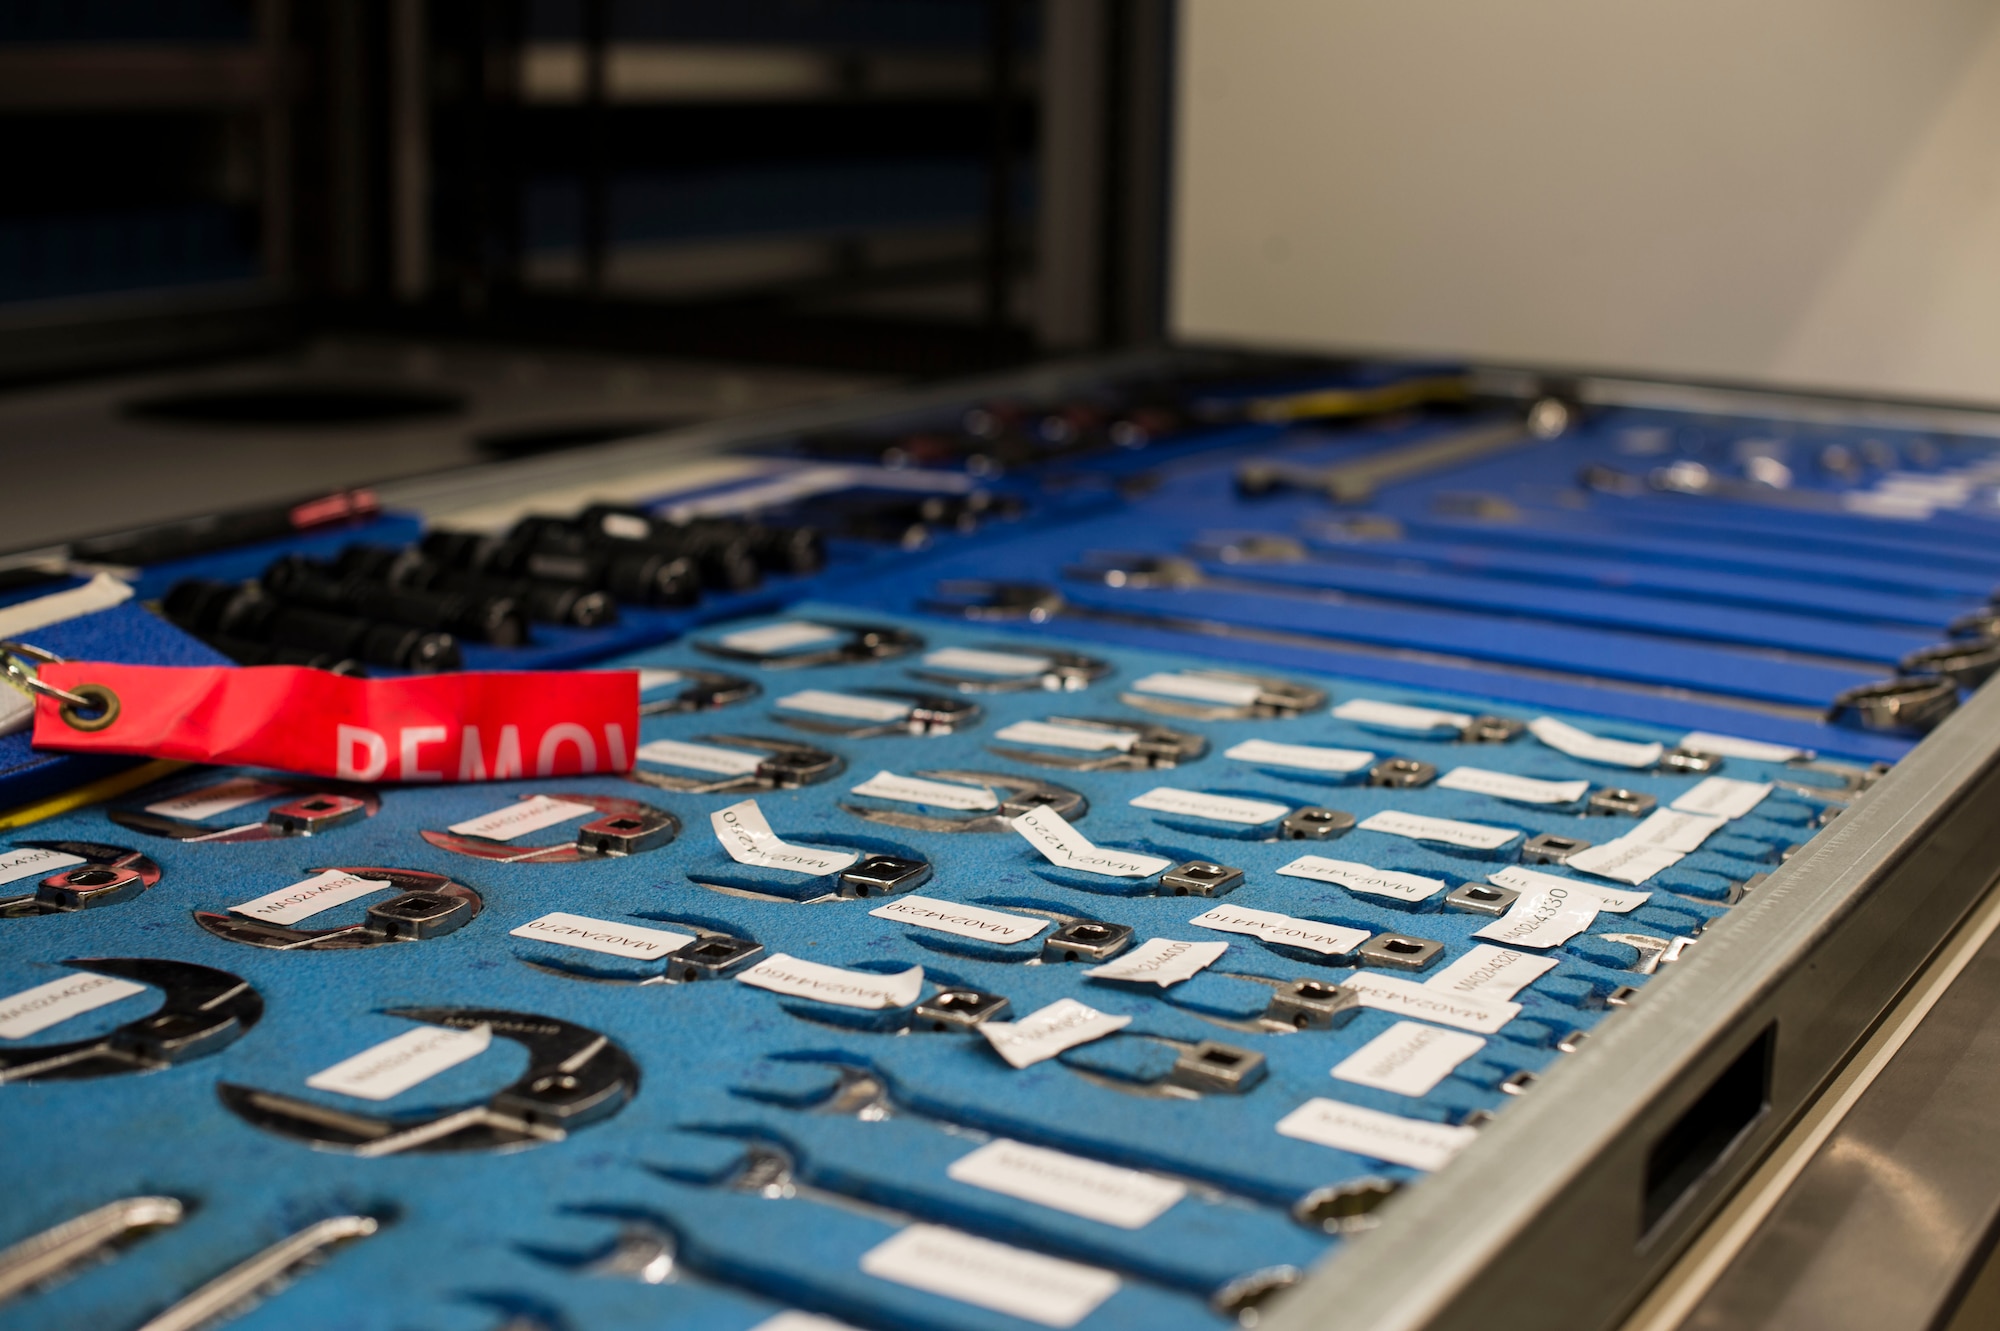 Aircraft maintenance tools lay on a tray inside a new vertical lift tool storage system at MacDill Air Force Base, Fla., July 17, 2019.